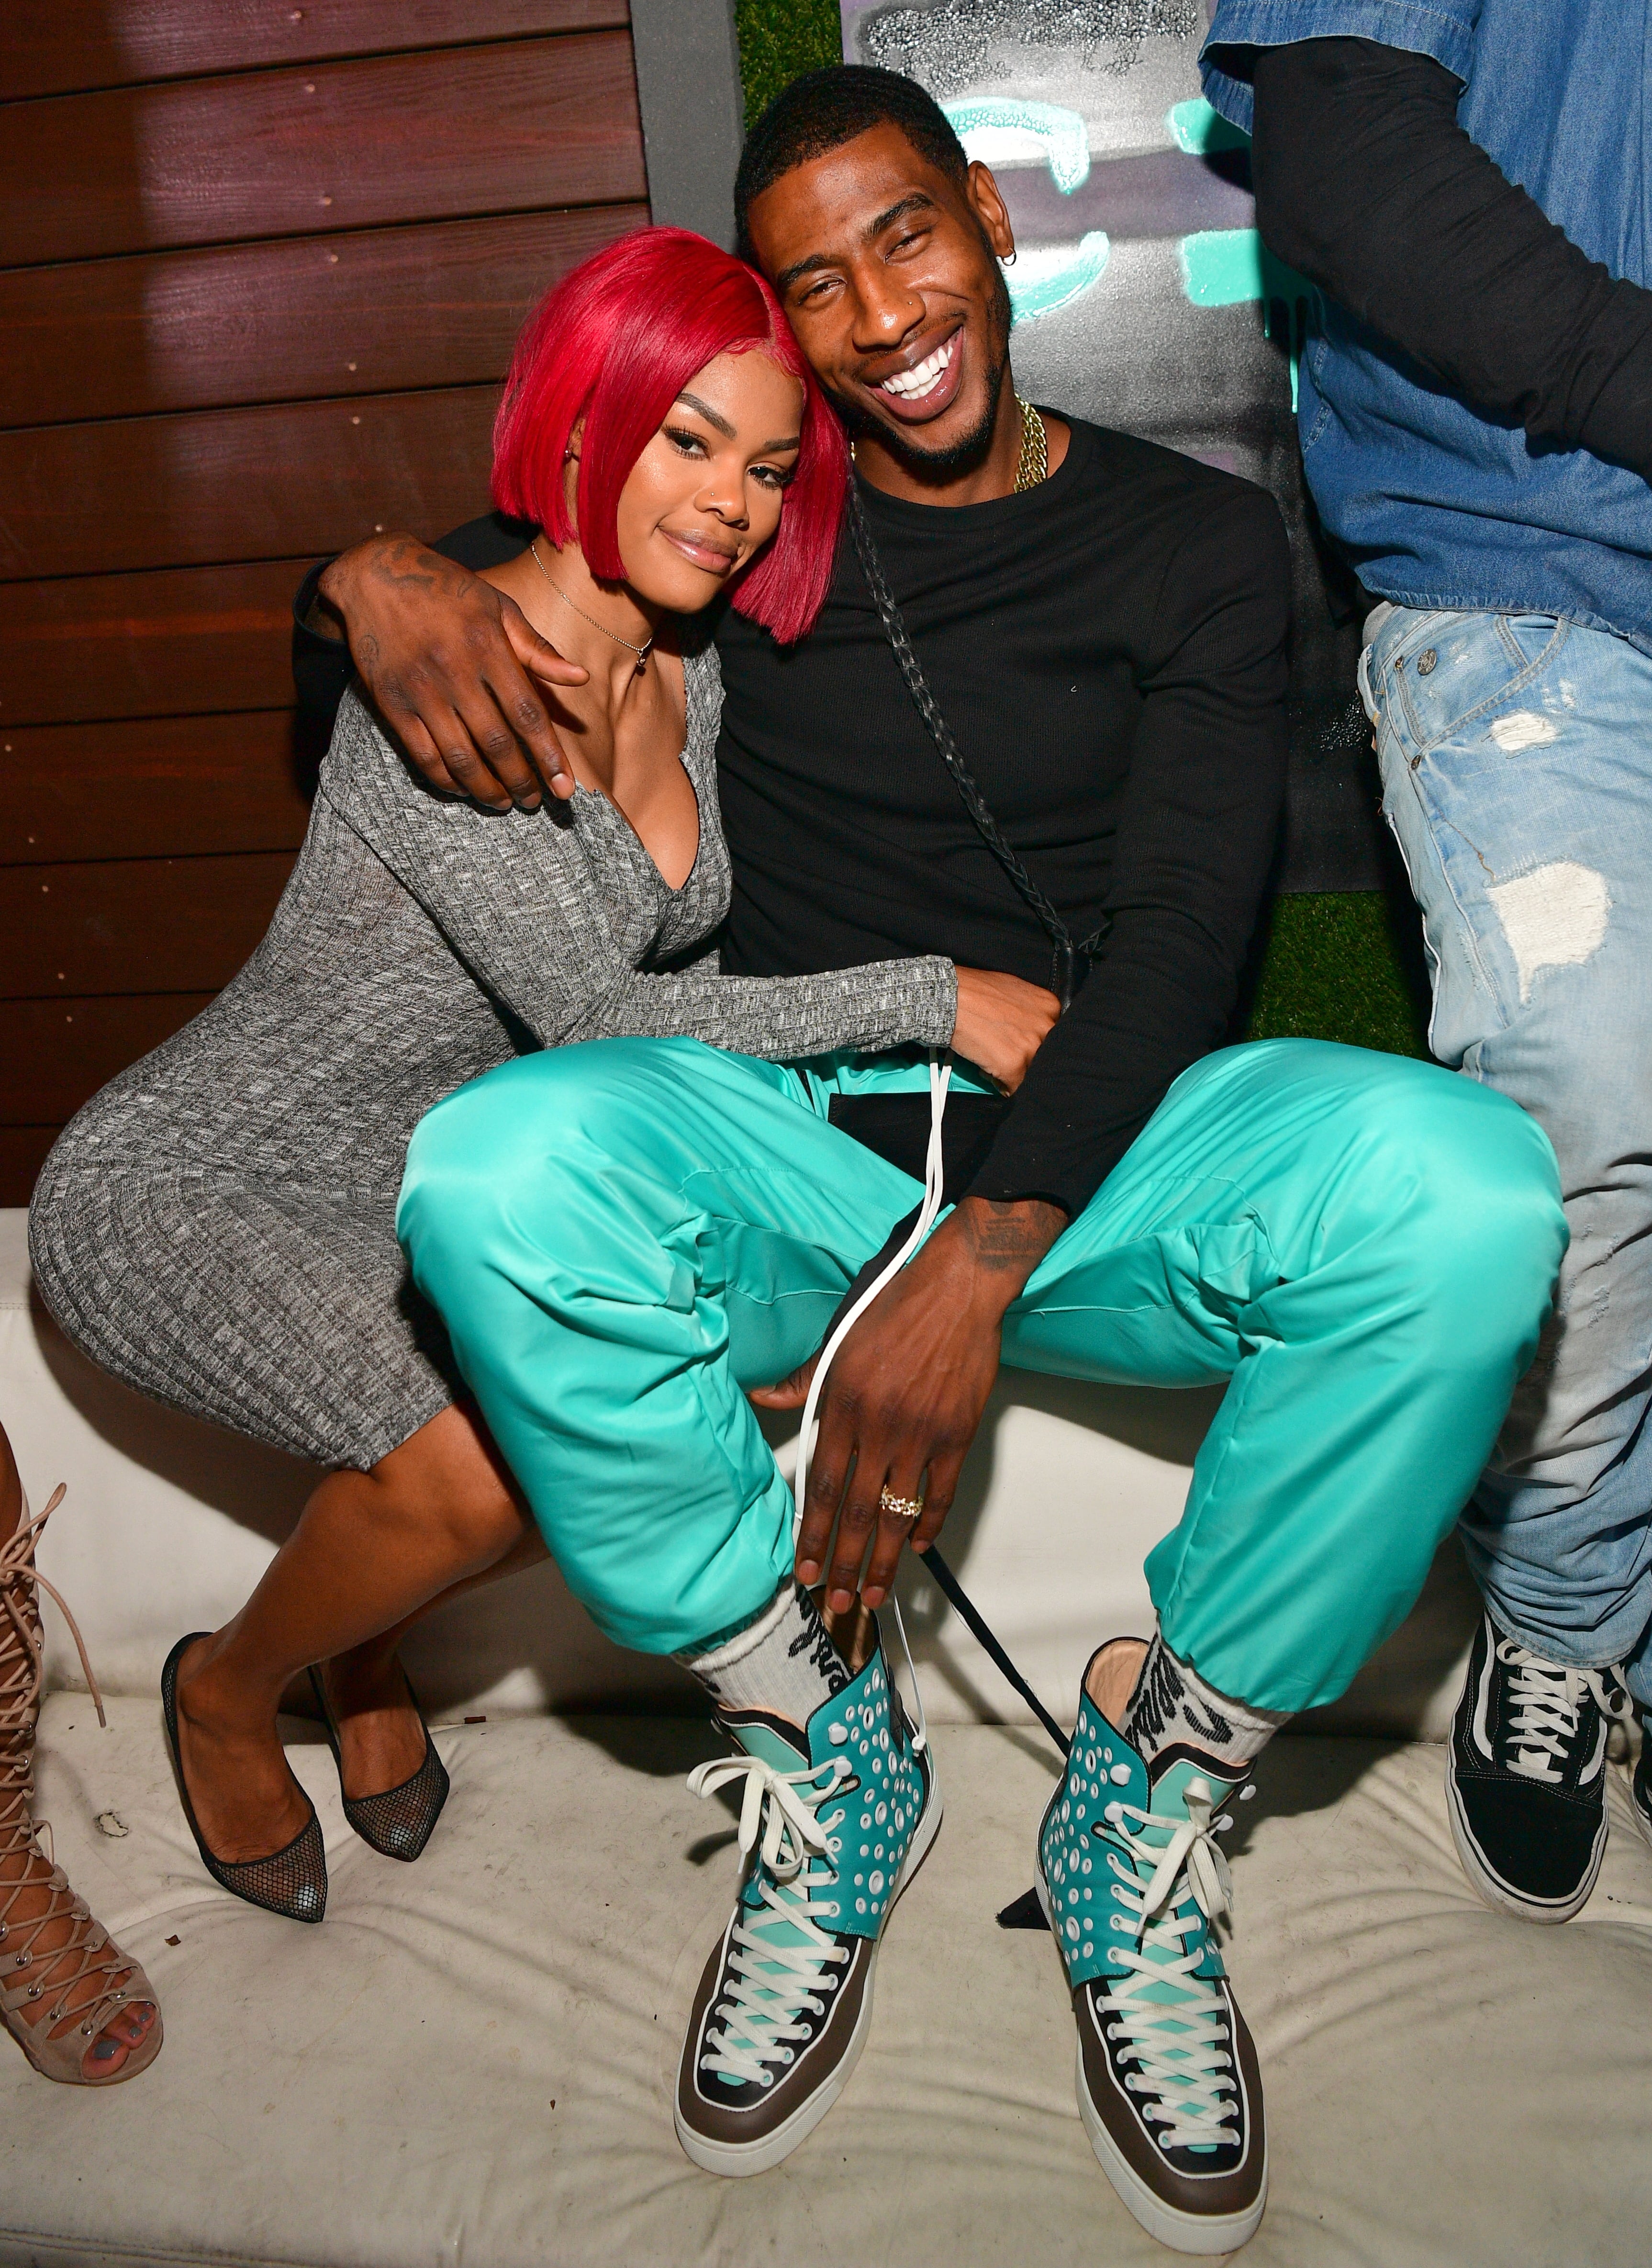 Teyana Taylor and Iman Shumpert, the World's Sexiest Couple, Are Getting a  Reality Show